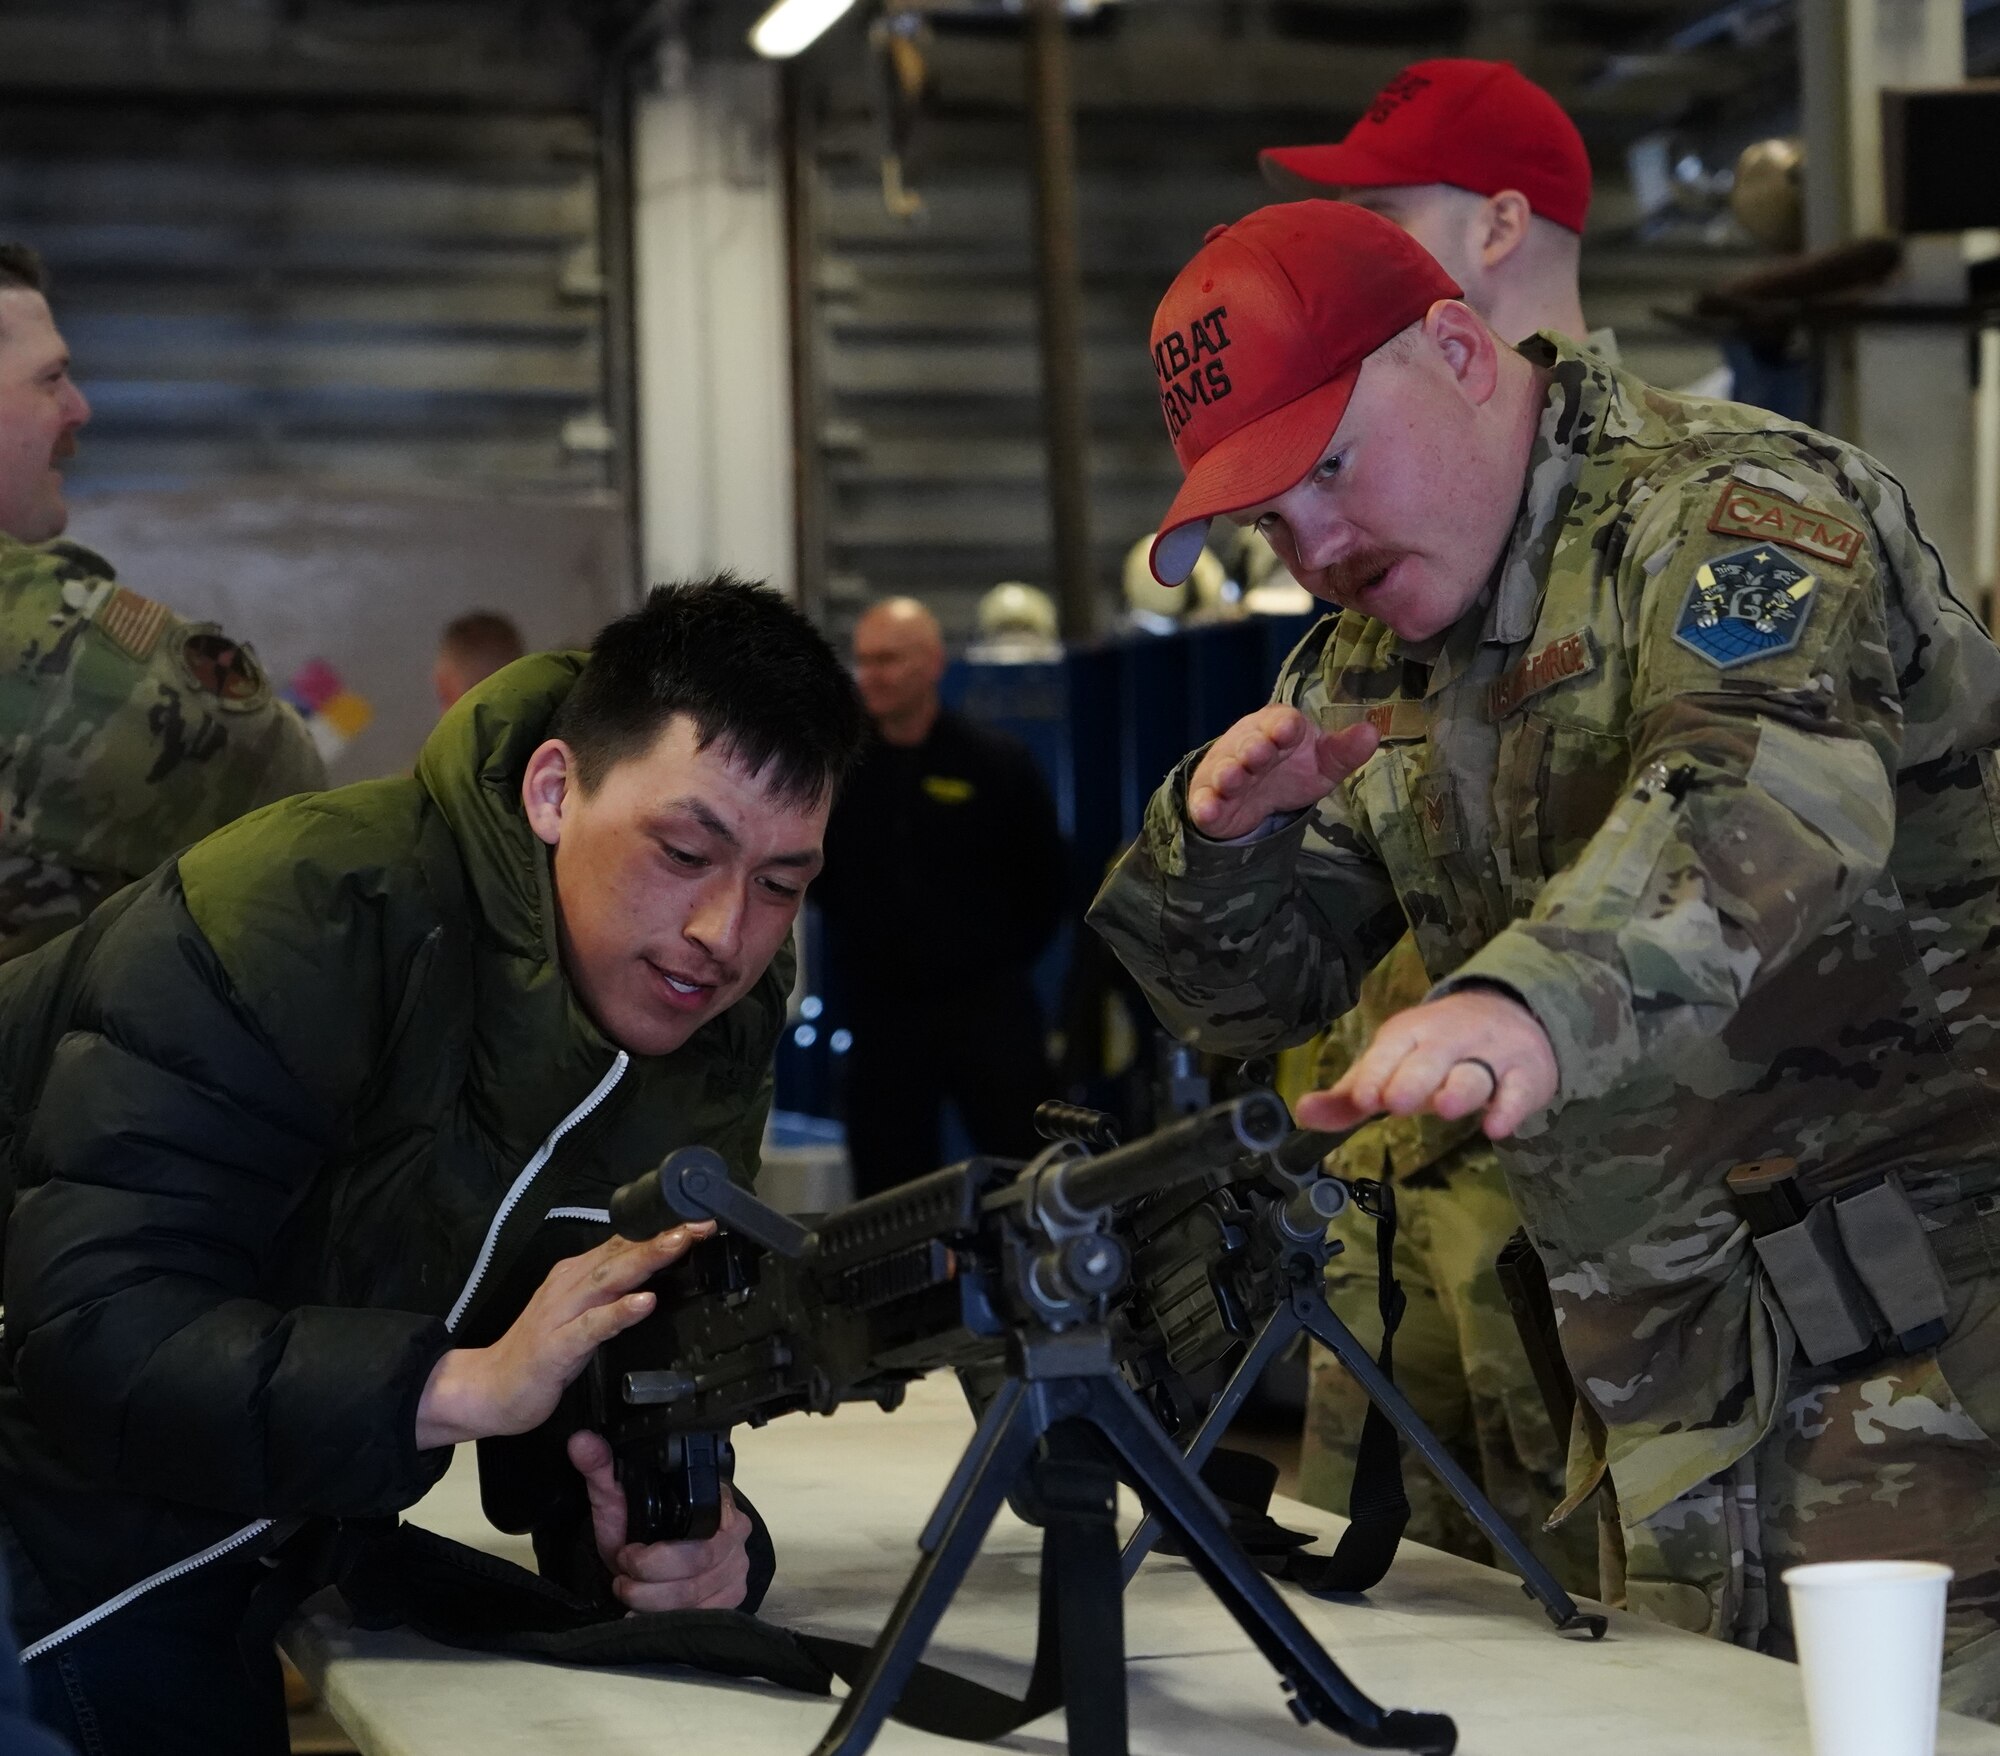 An airman showing a Greenland local a rifle on display